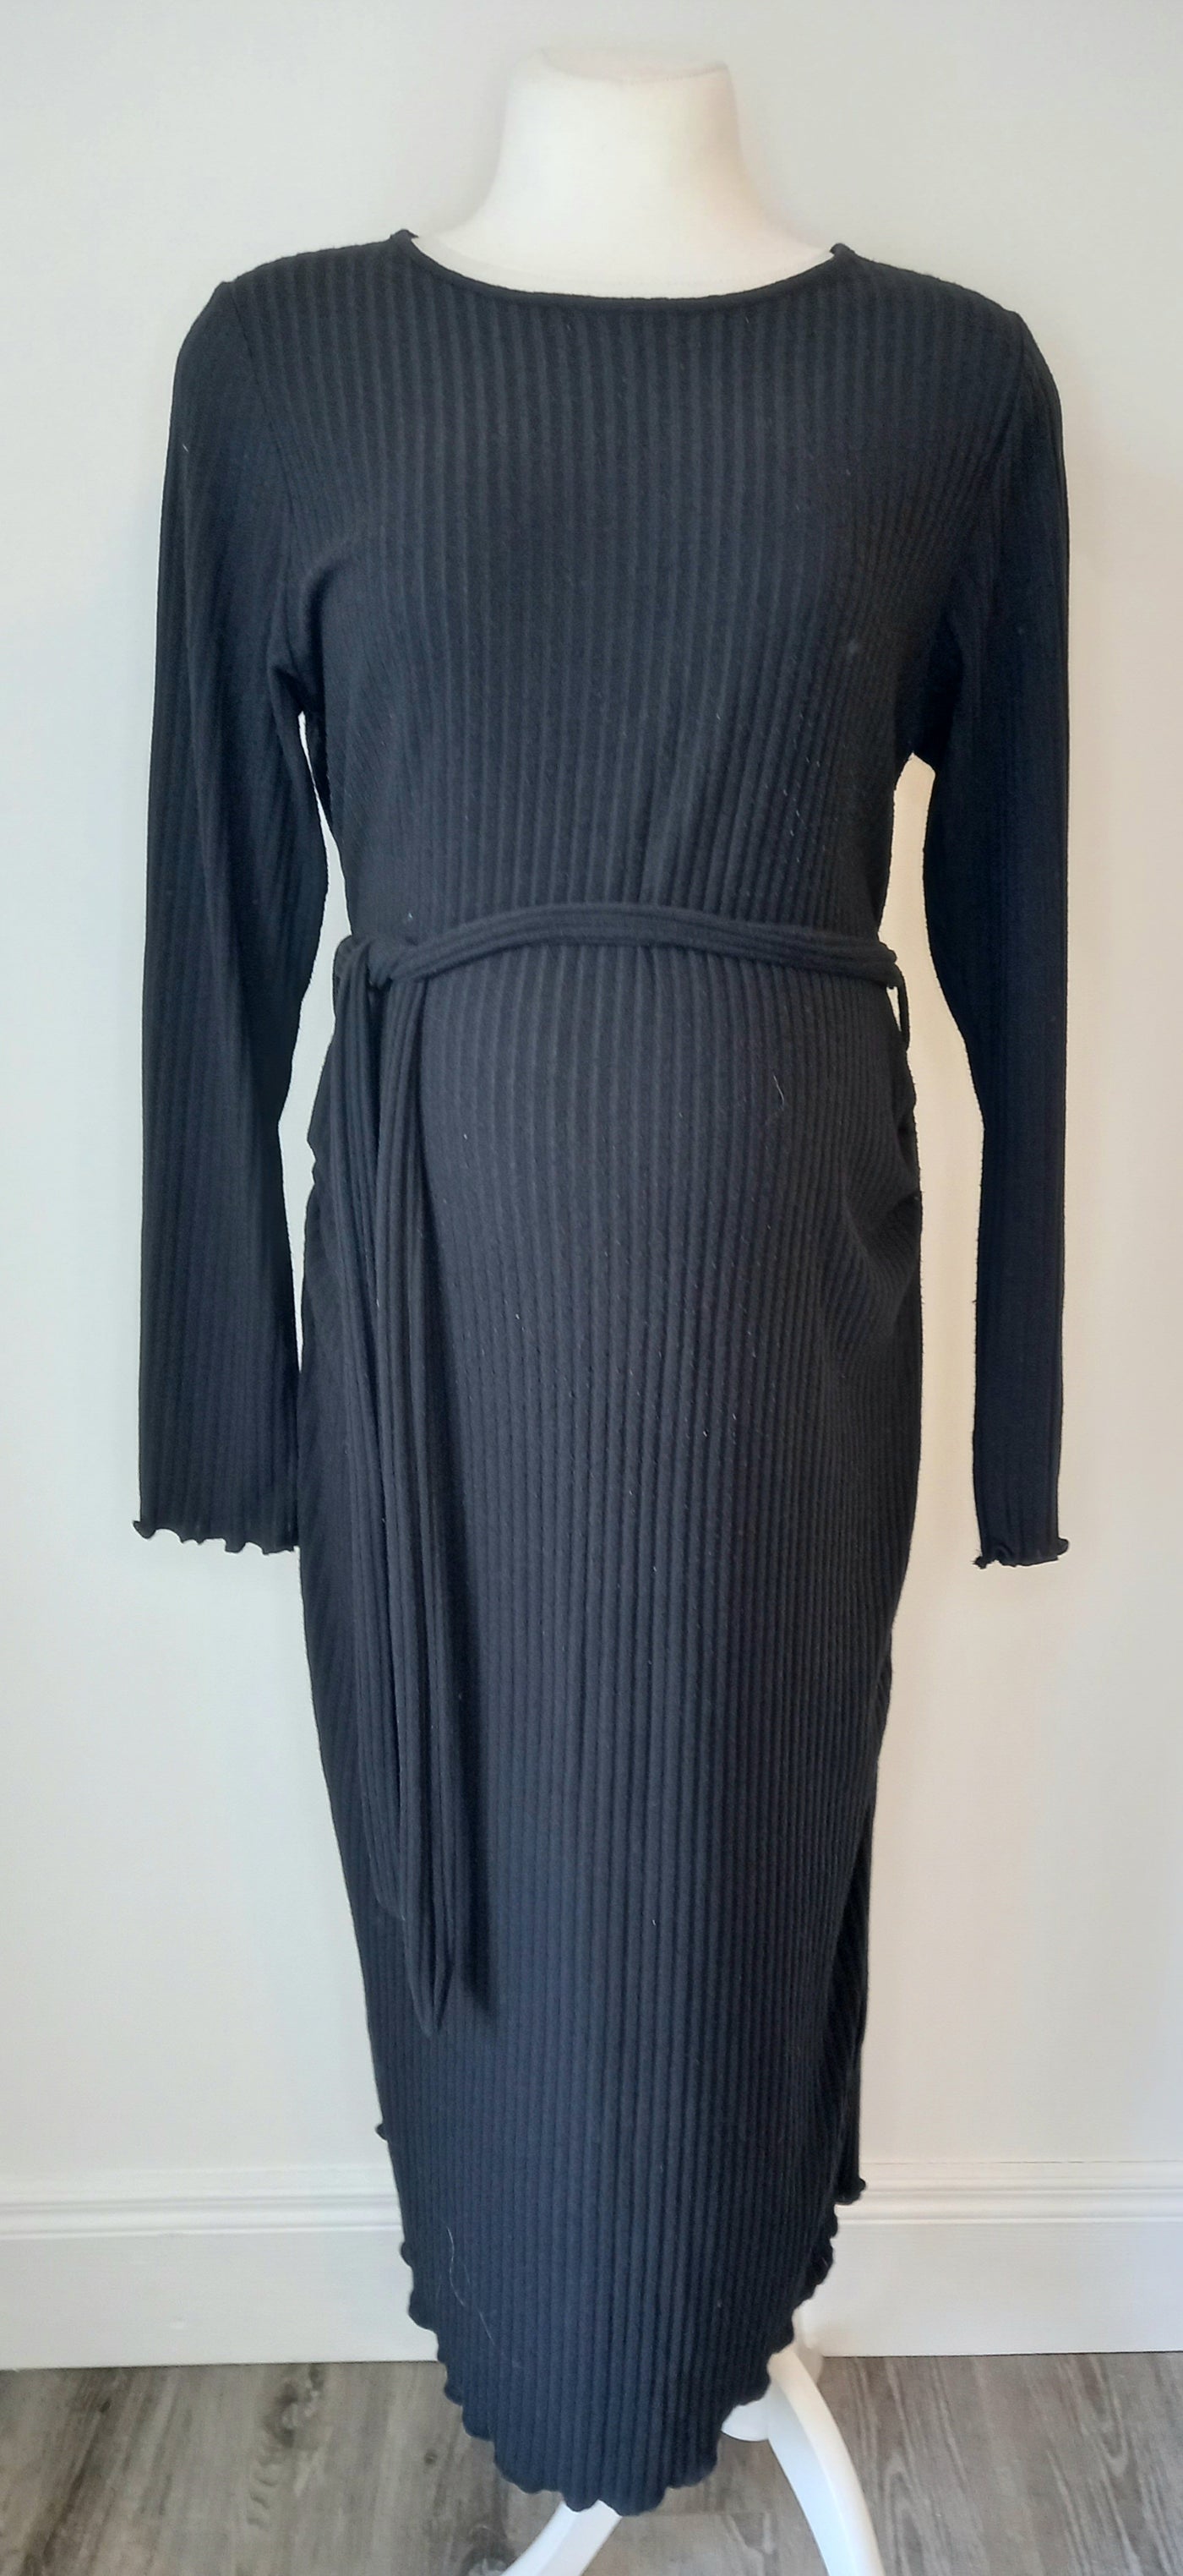 George Maternity Black Ribbed Midi Dress with Waist Tie - Size 18 (more like size 16)